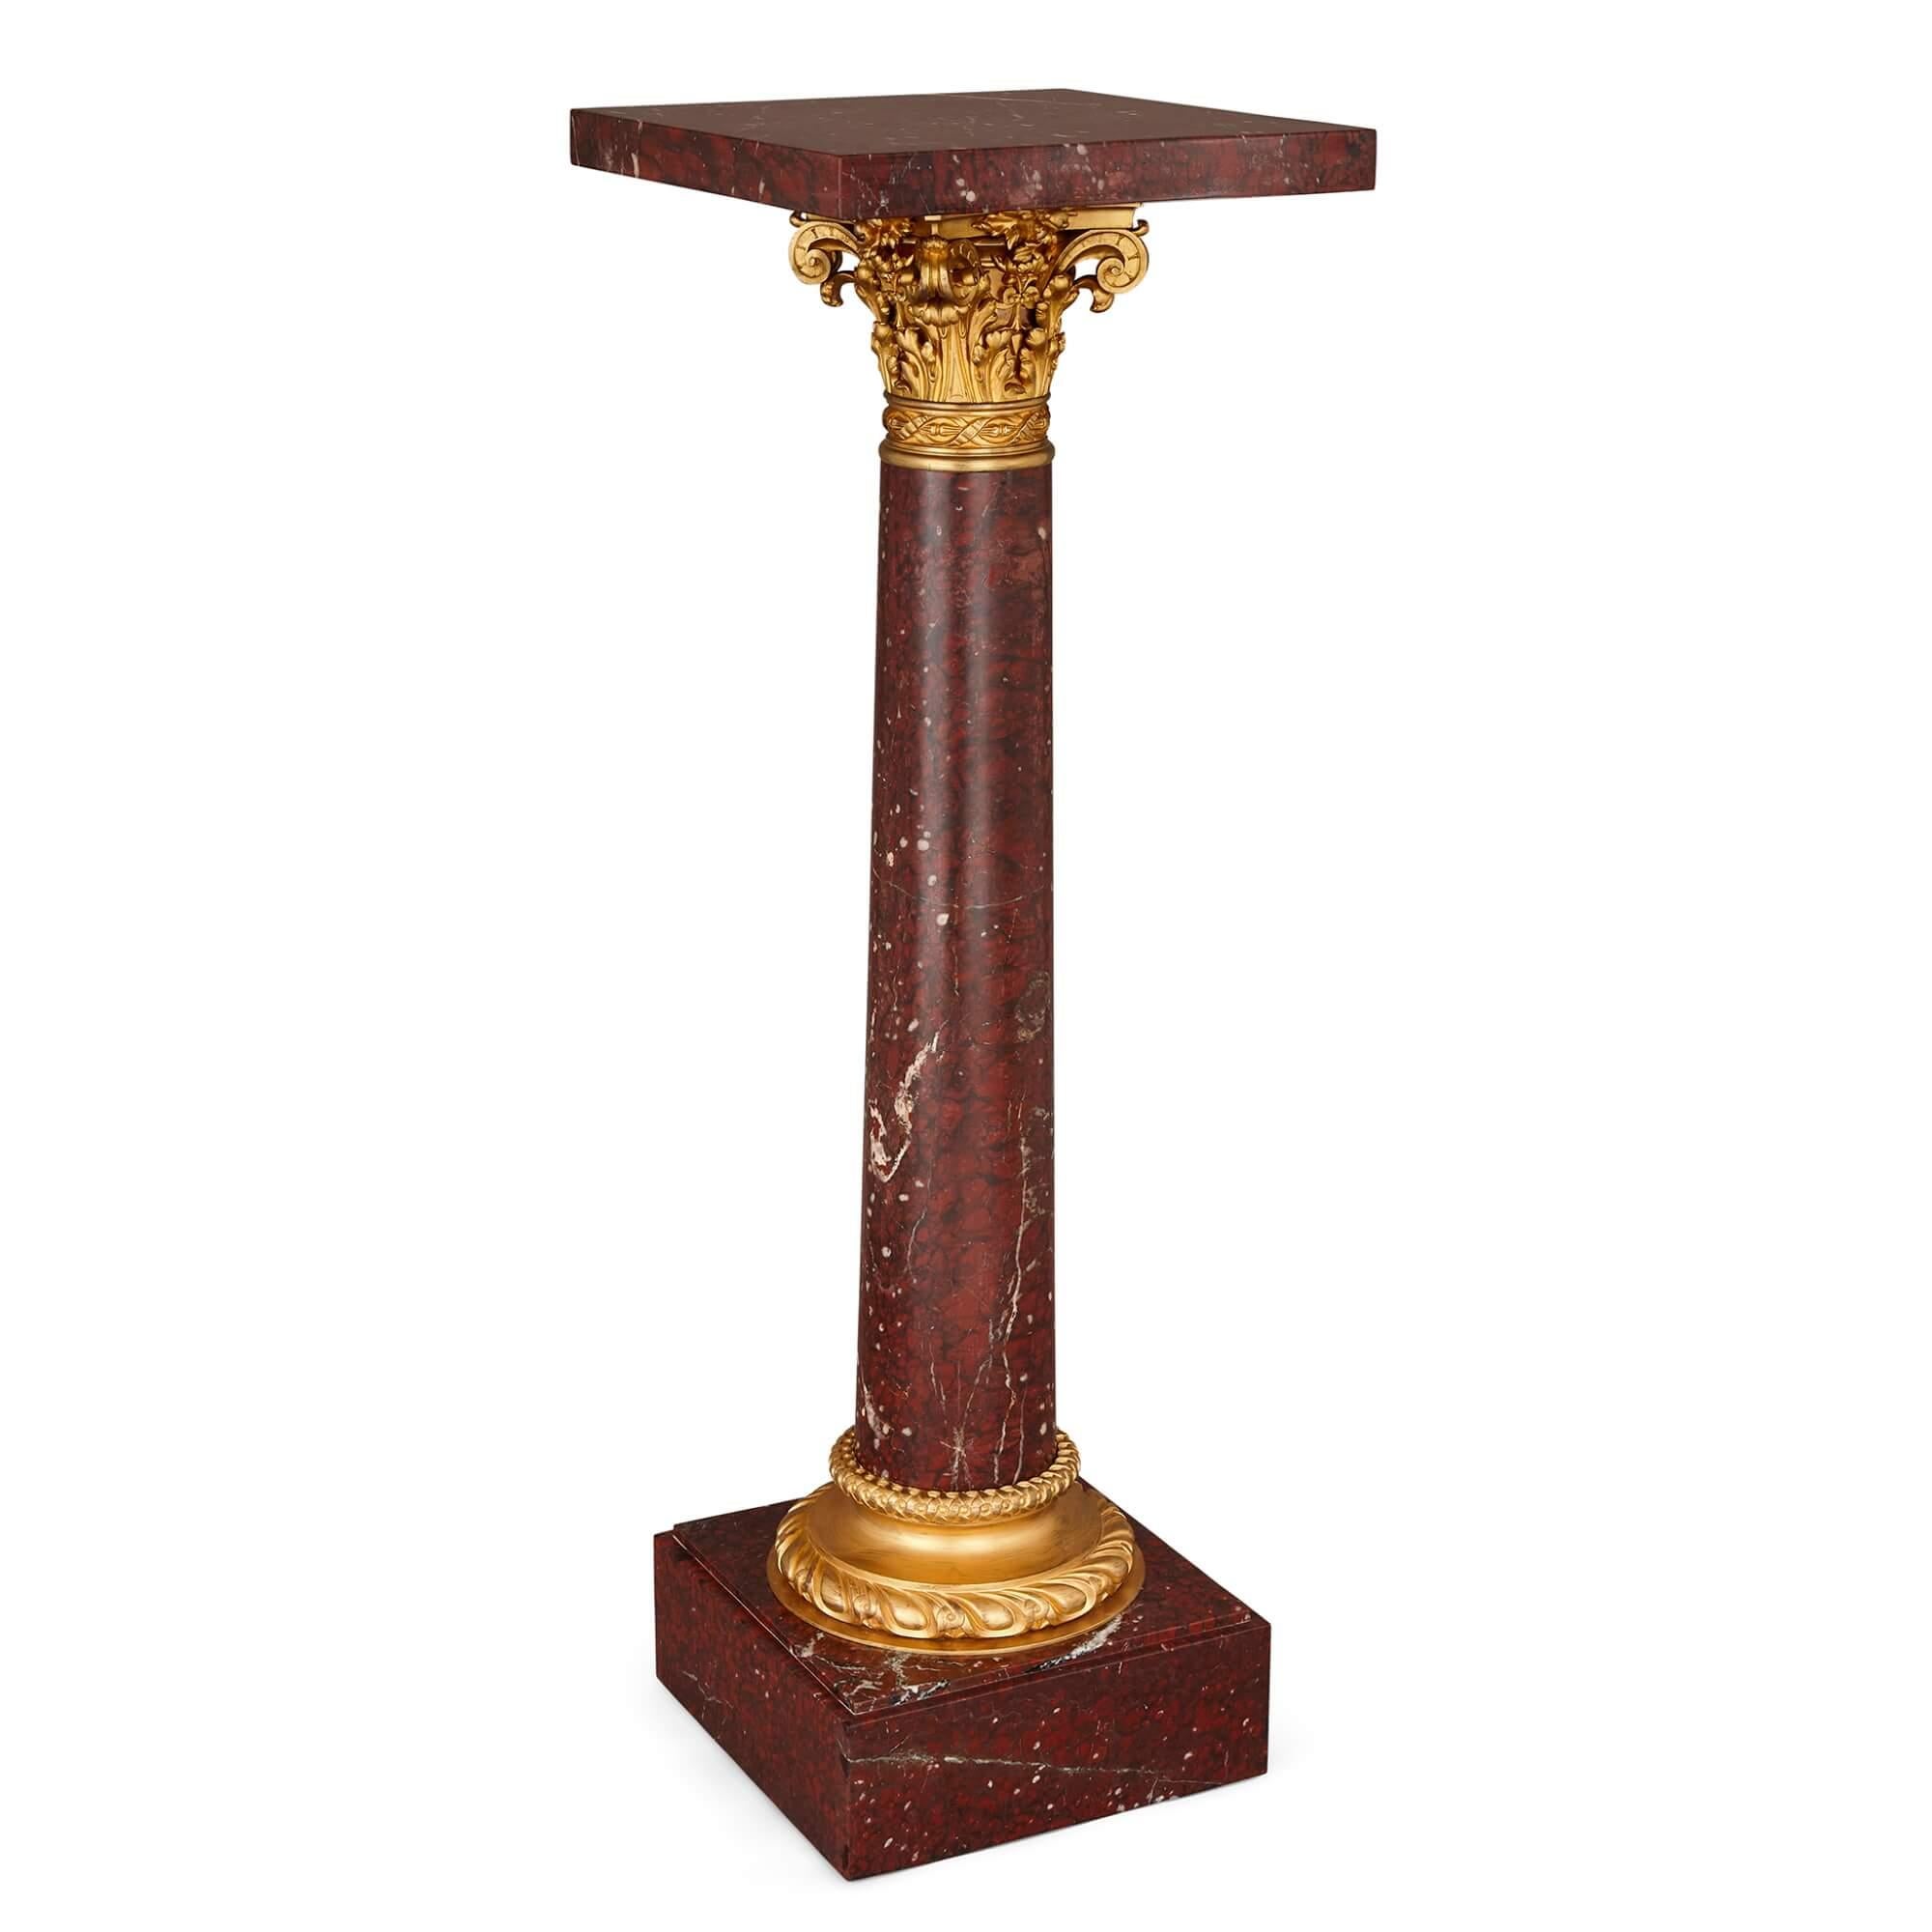 French Neoclassical gilt-bronze and rouge griotte marble pedestal.
French, 19th century.
Measures: height 123 cm, width 41 cm, depth 41 cm.

In an highly pleasing combination of ormolu (gilt-bronze) and rouge griotte marble, this very fine